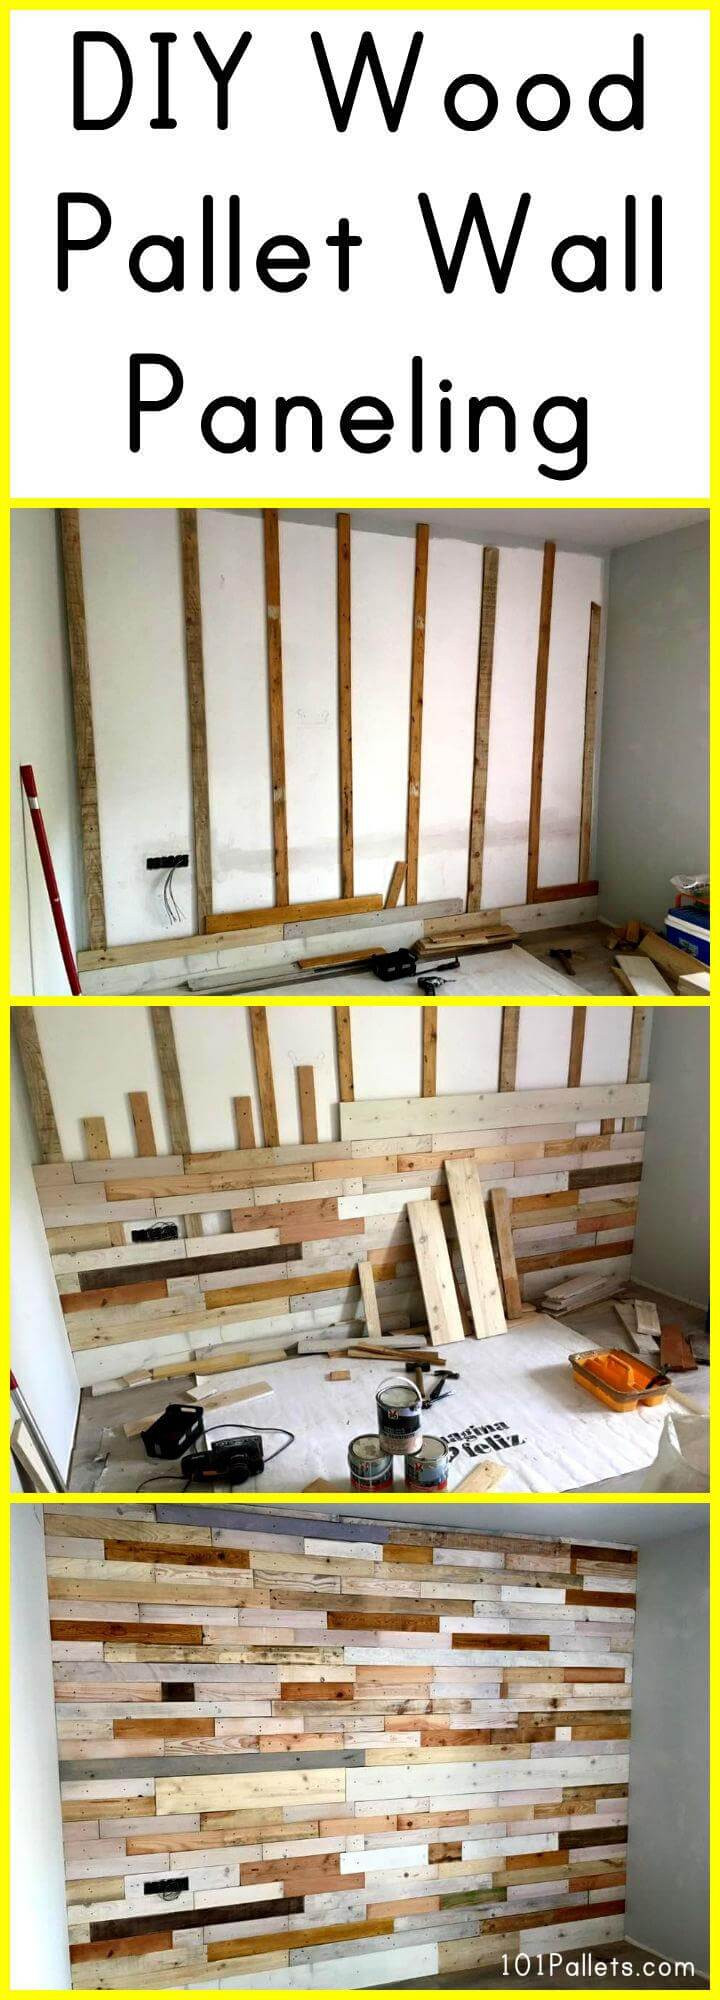 DIY With Wooden Pallets
 DIY Wood Pallet Wall Paneling